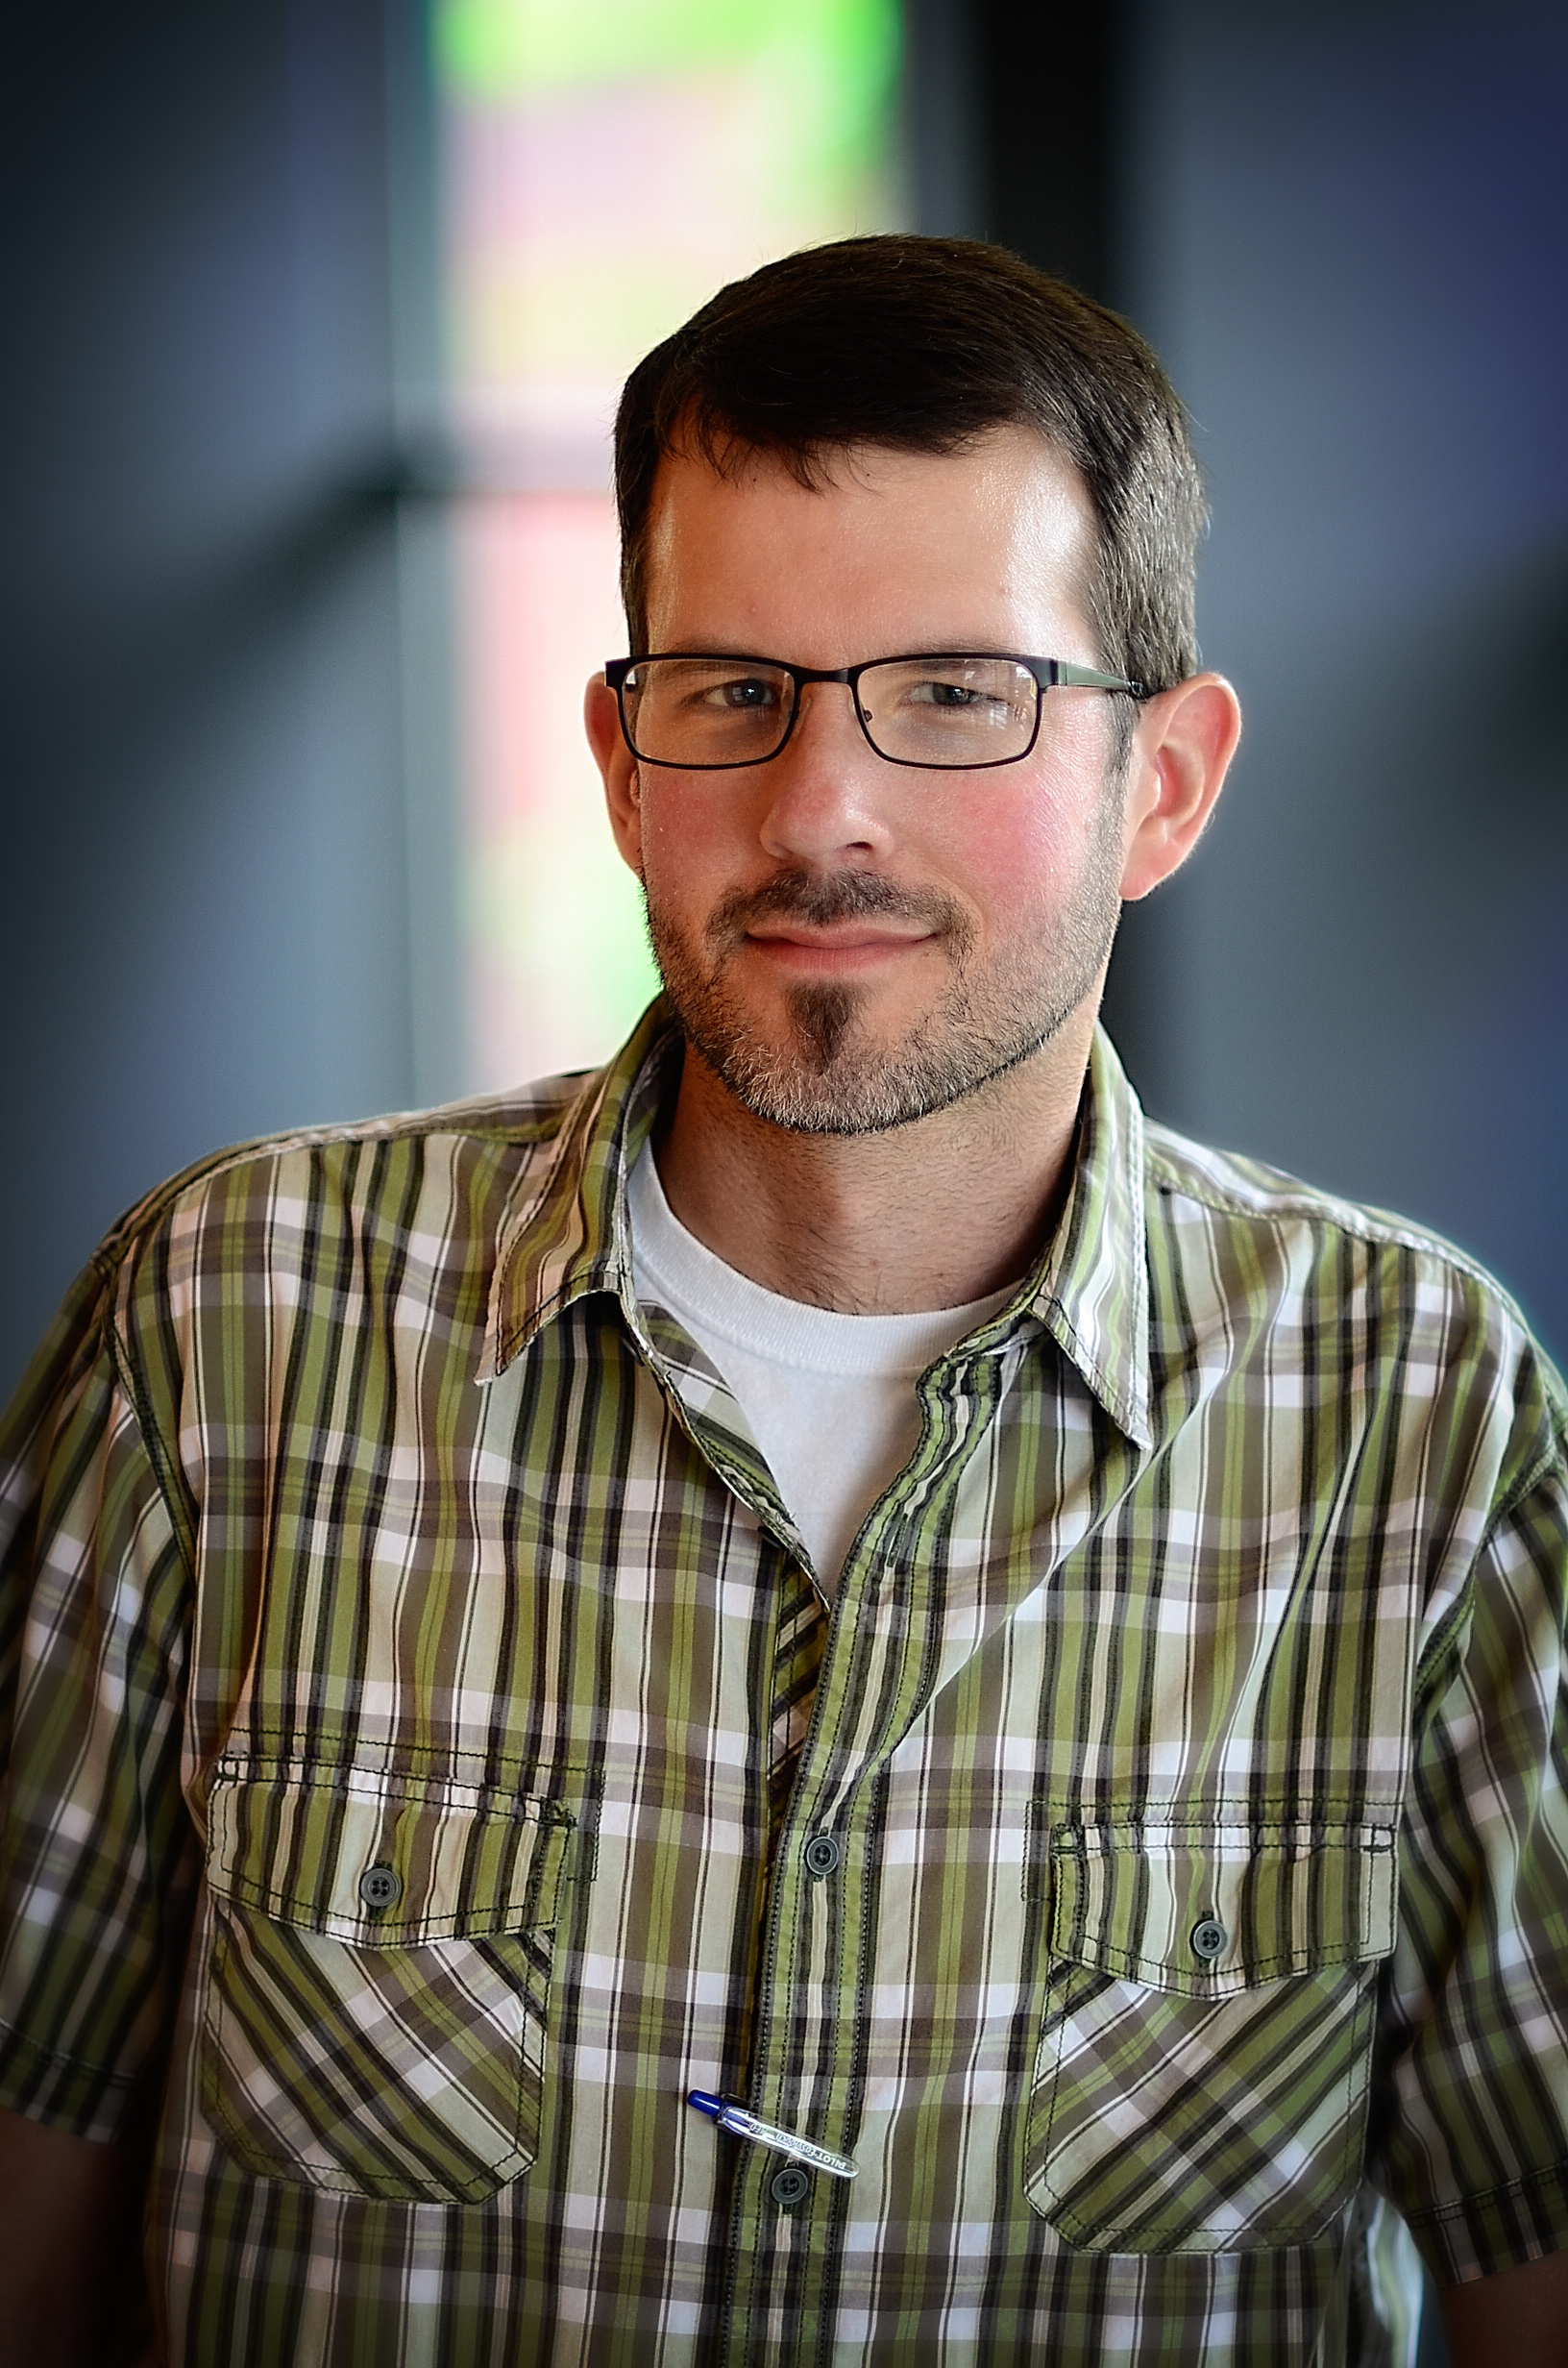 Man in glasses smiling in a plaid shirt. He has a beard.